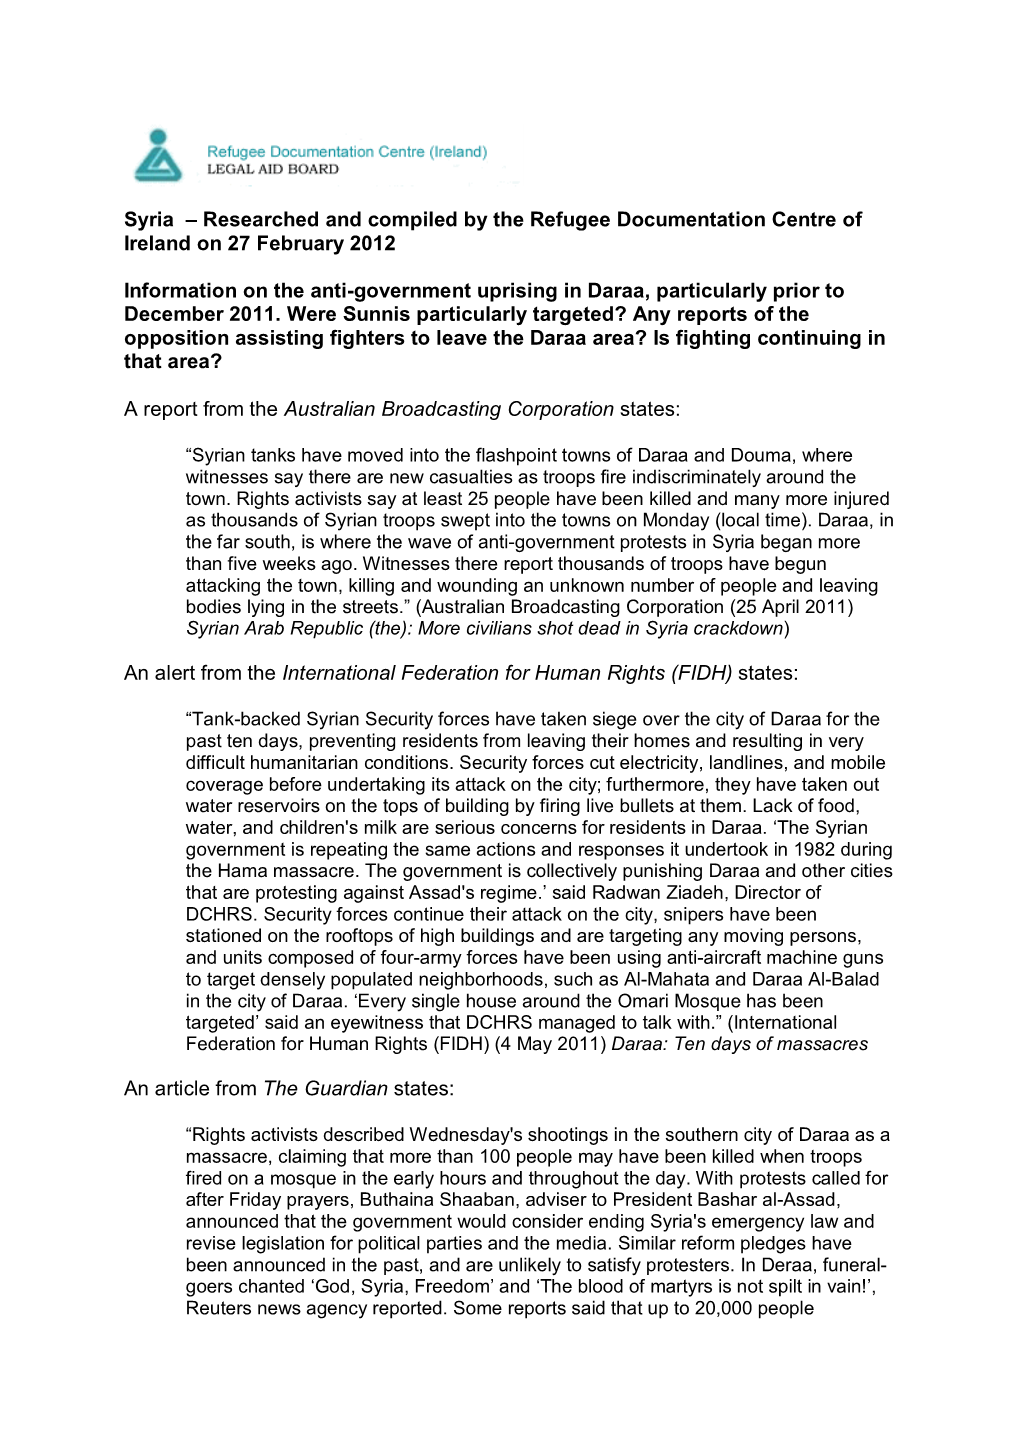 Syria – Researched and Compiled by the Refugee Documentation Centre of Ireland on 27 February 2012